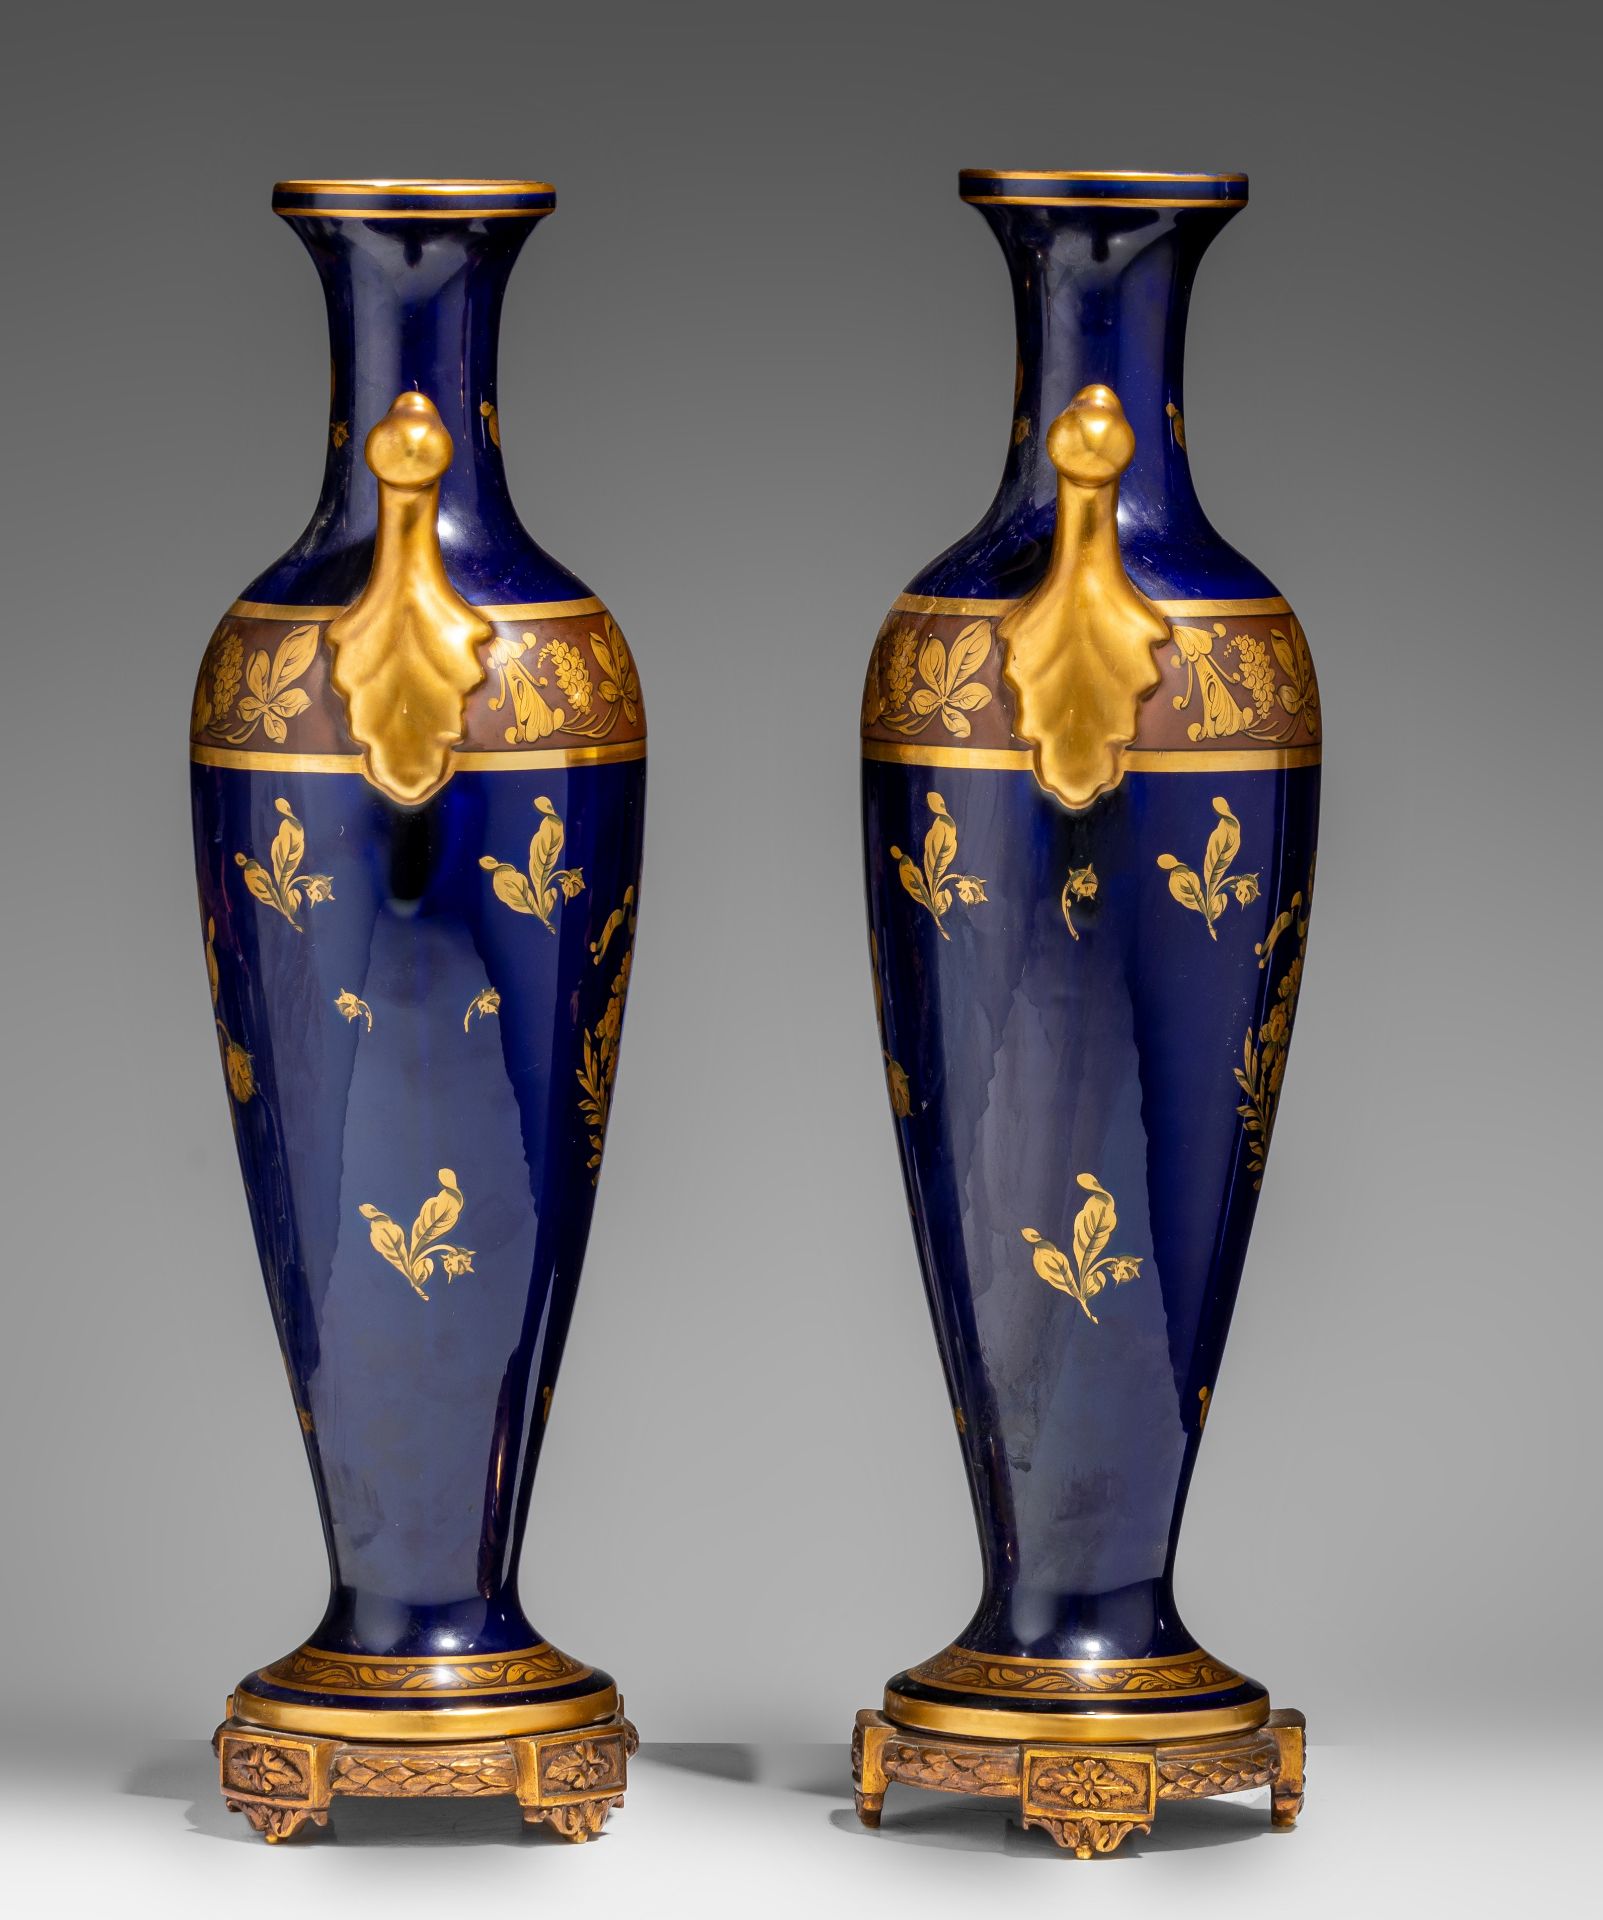 A pair of blue Royal ground and gilt decorated oblong Sevres-type vases, H 49,5 cm - Image 5 of 7